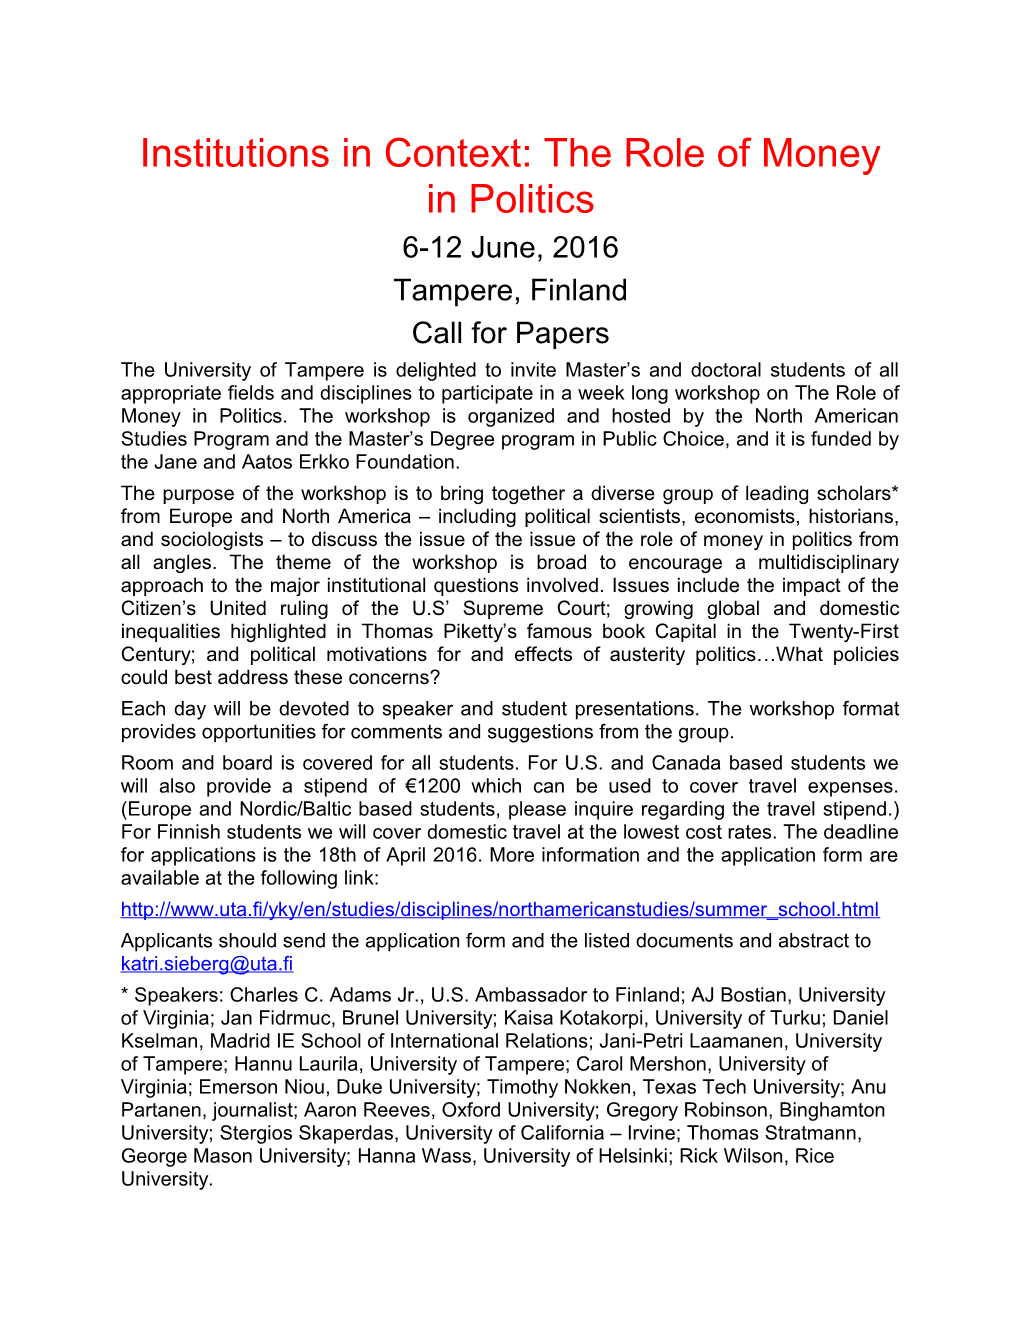 Institutions in Context: the Role of Money in Politics